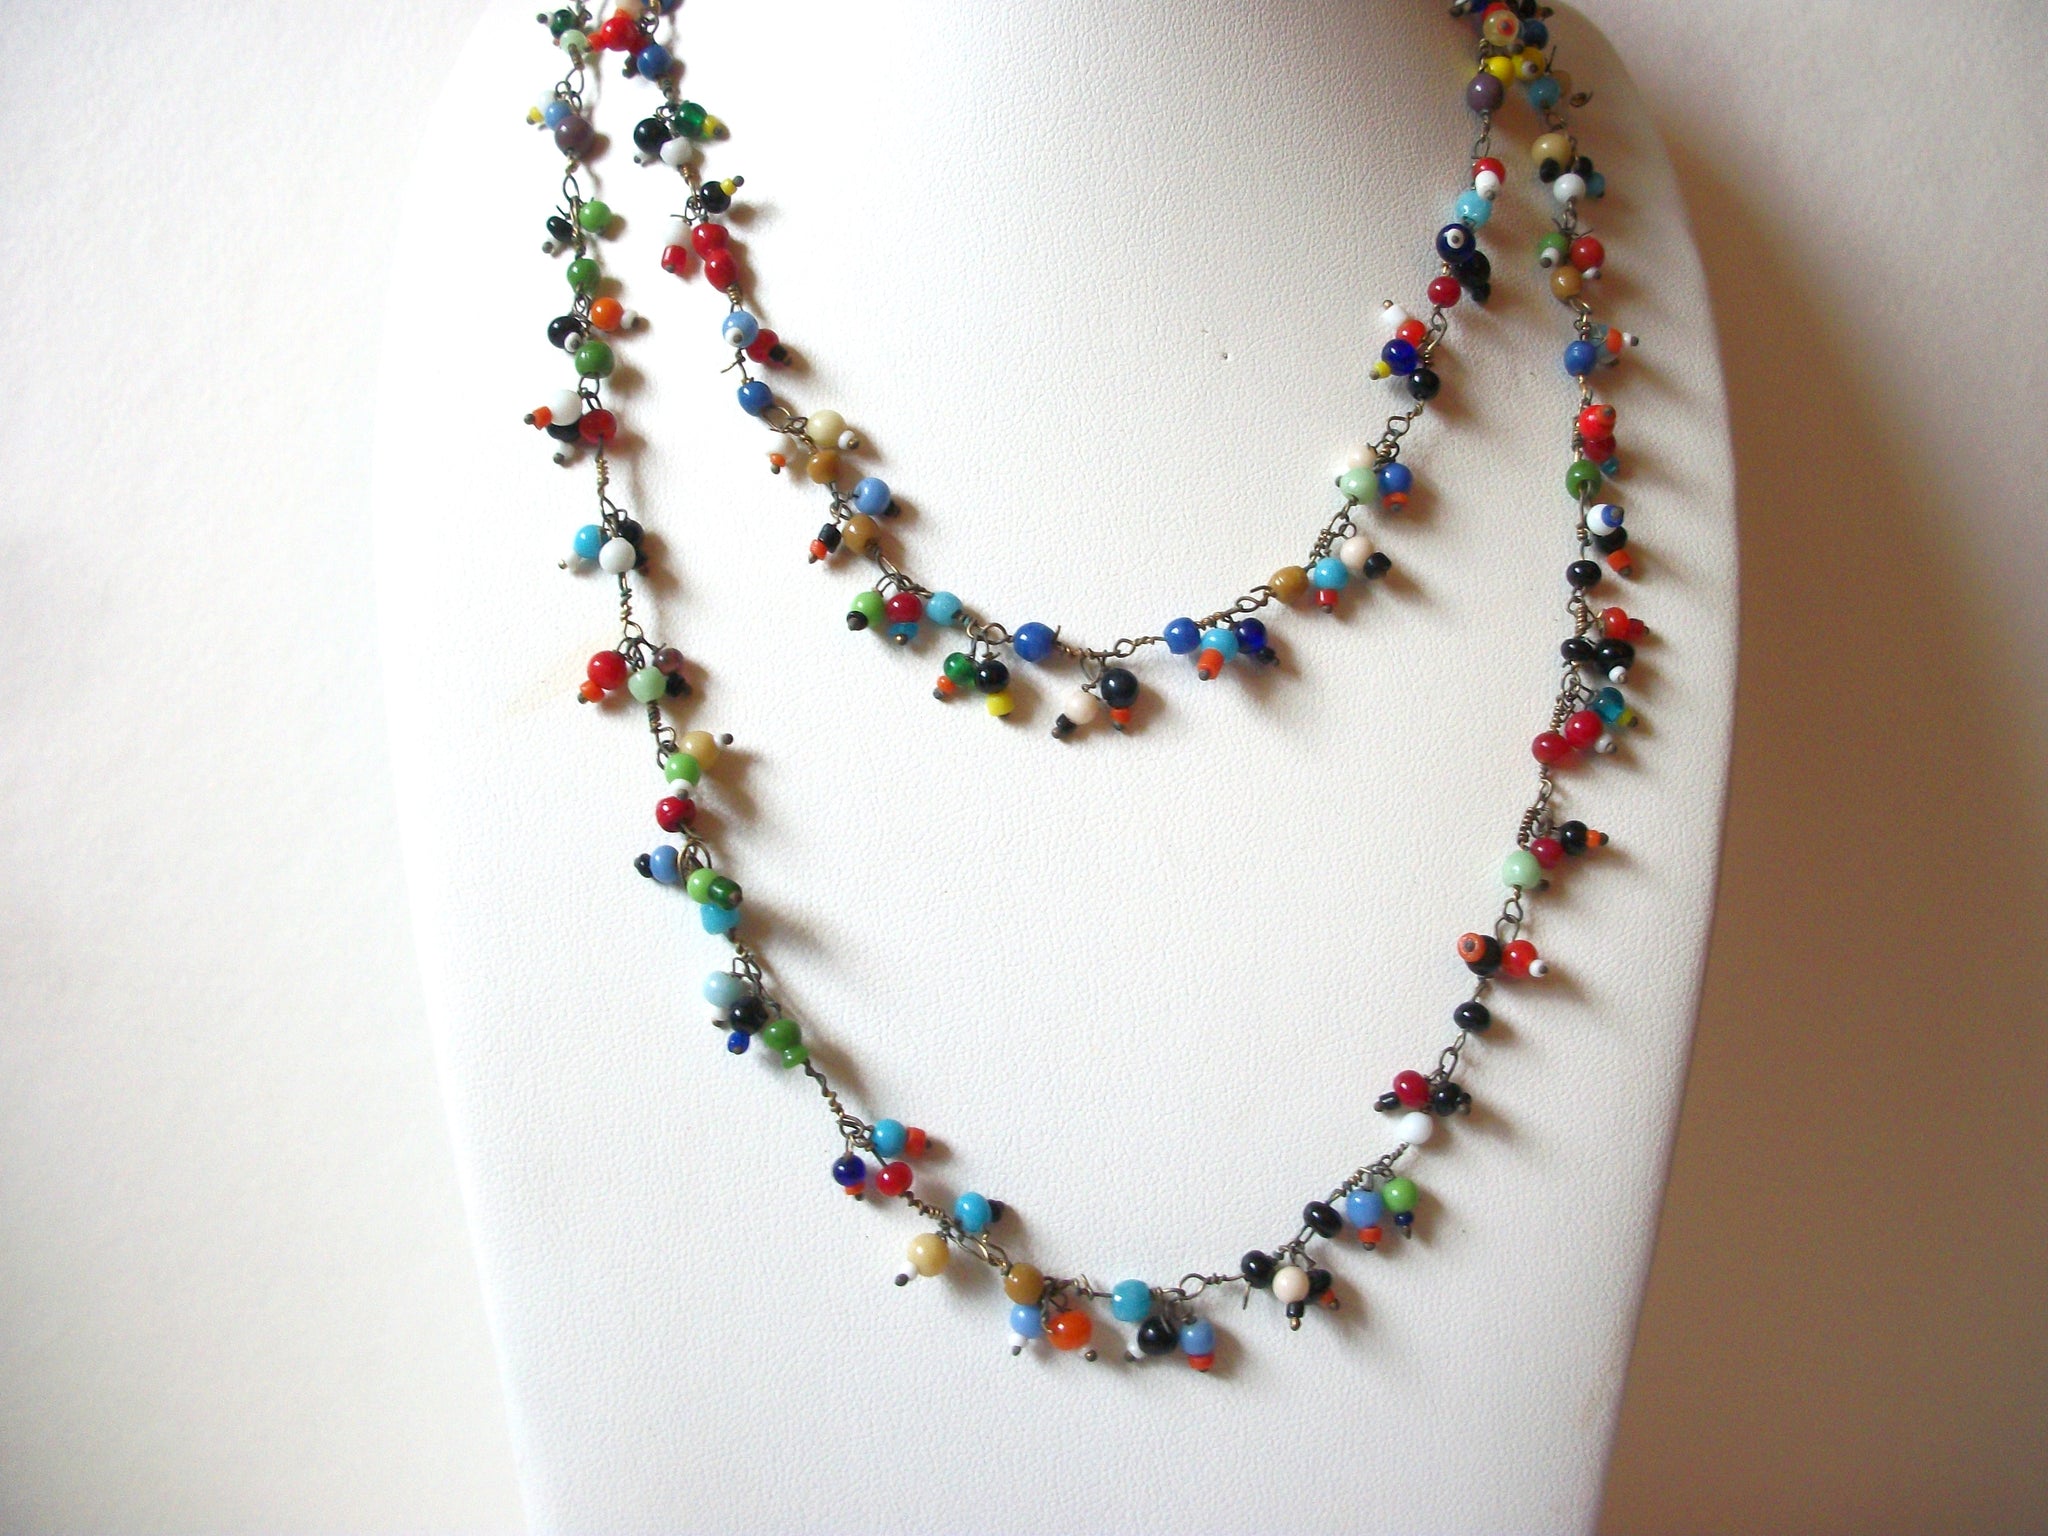 Colorful Southwestern Glass Necklace 82220